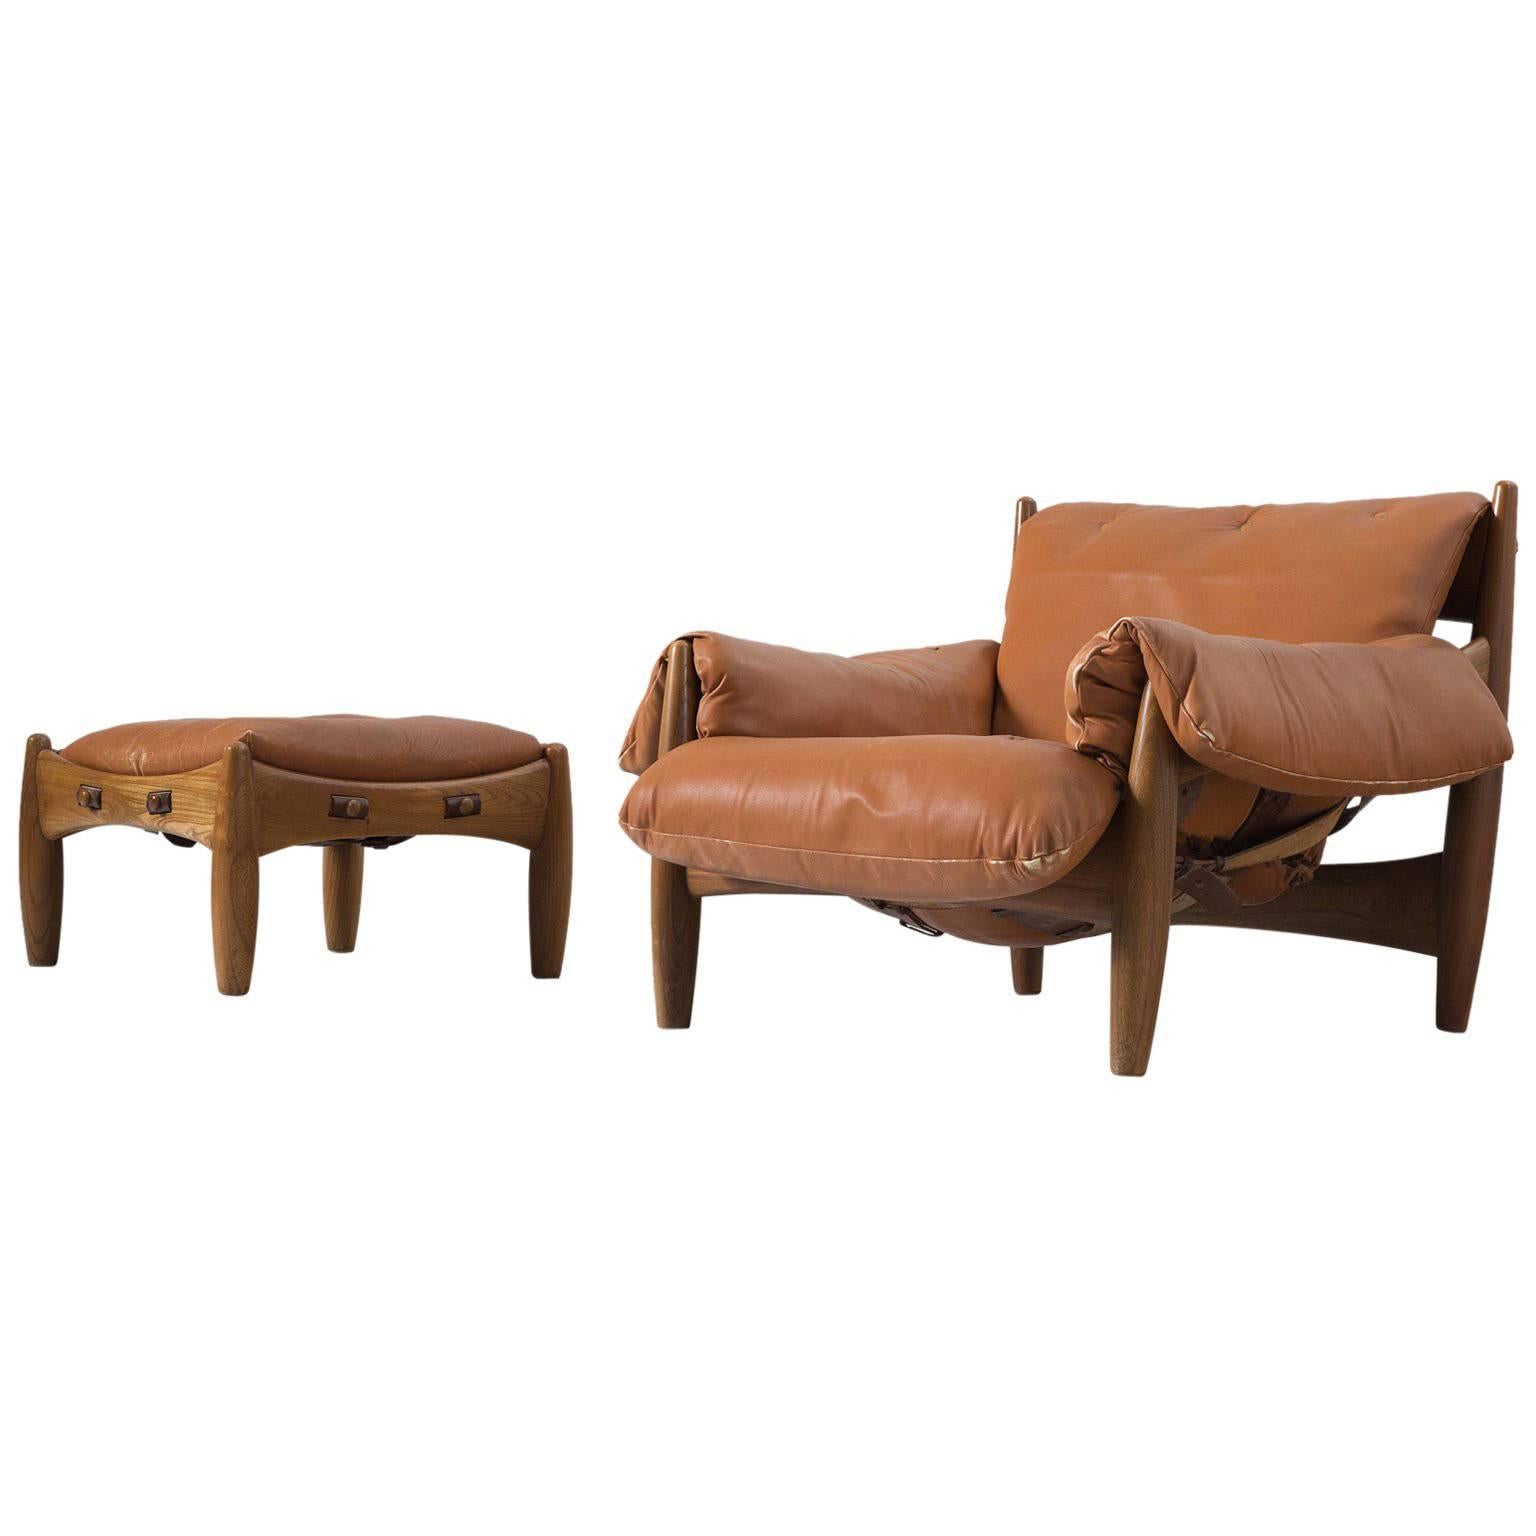 Sergio Rodrigues 'Sheriff' Lounge Chair with Ottoman in Original Brown Leather